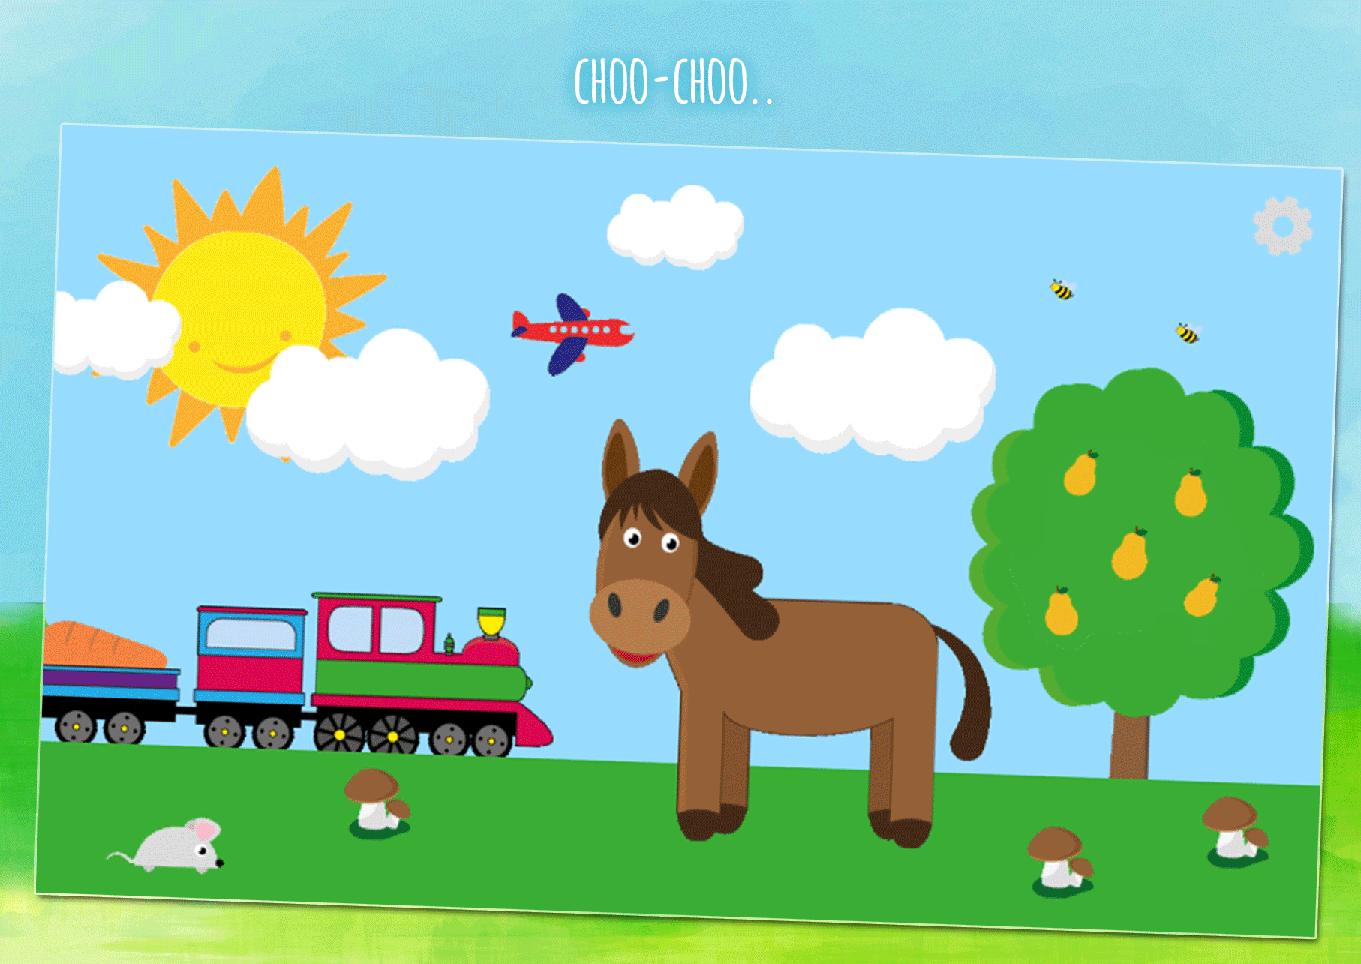 Moo & animals - kids game for toddlers from 1 year 1.7.7 Screenshot 17